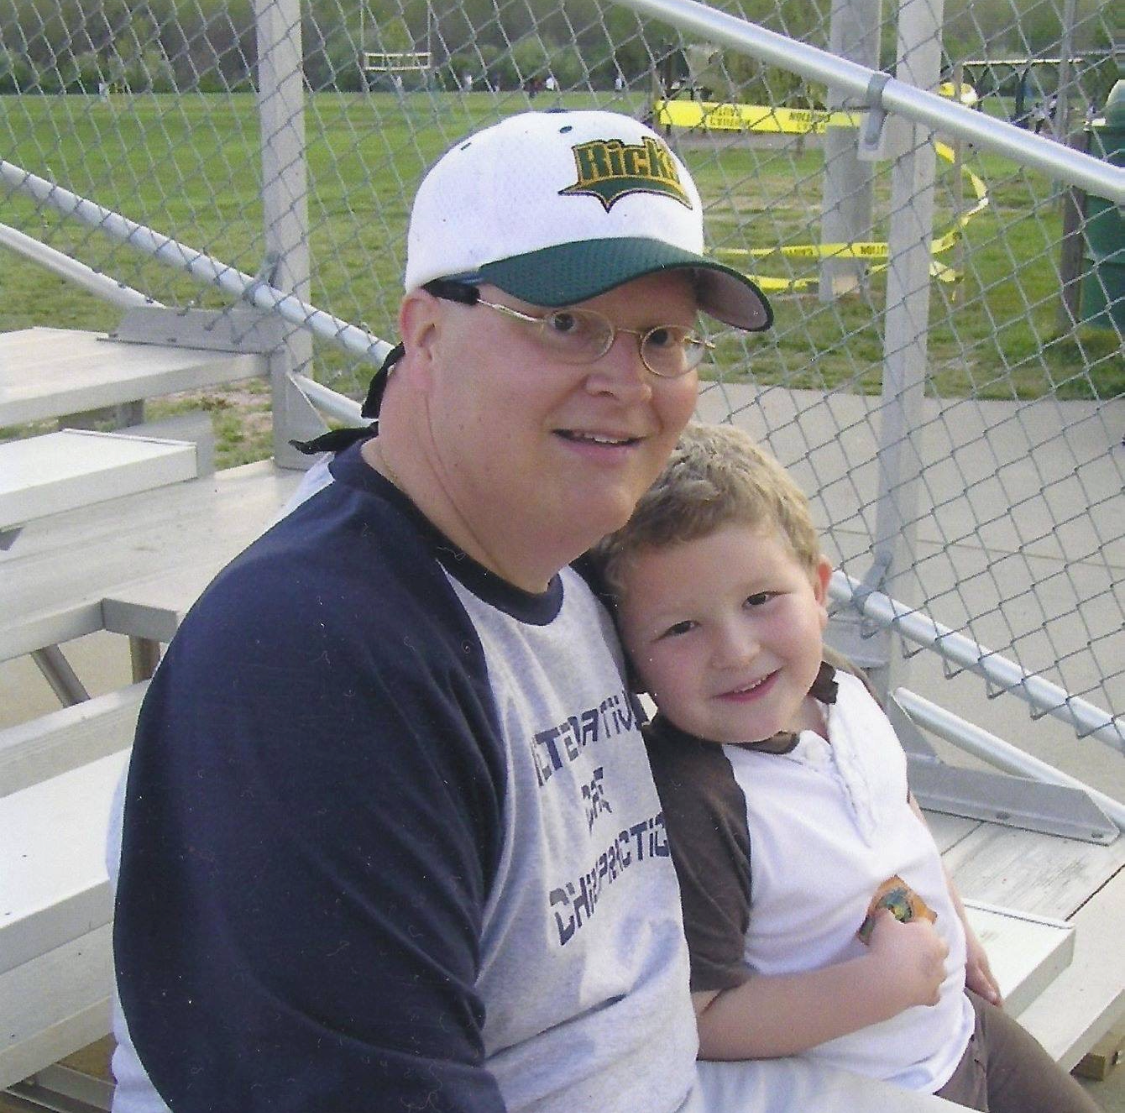 Little Adam and Dad at baseball game